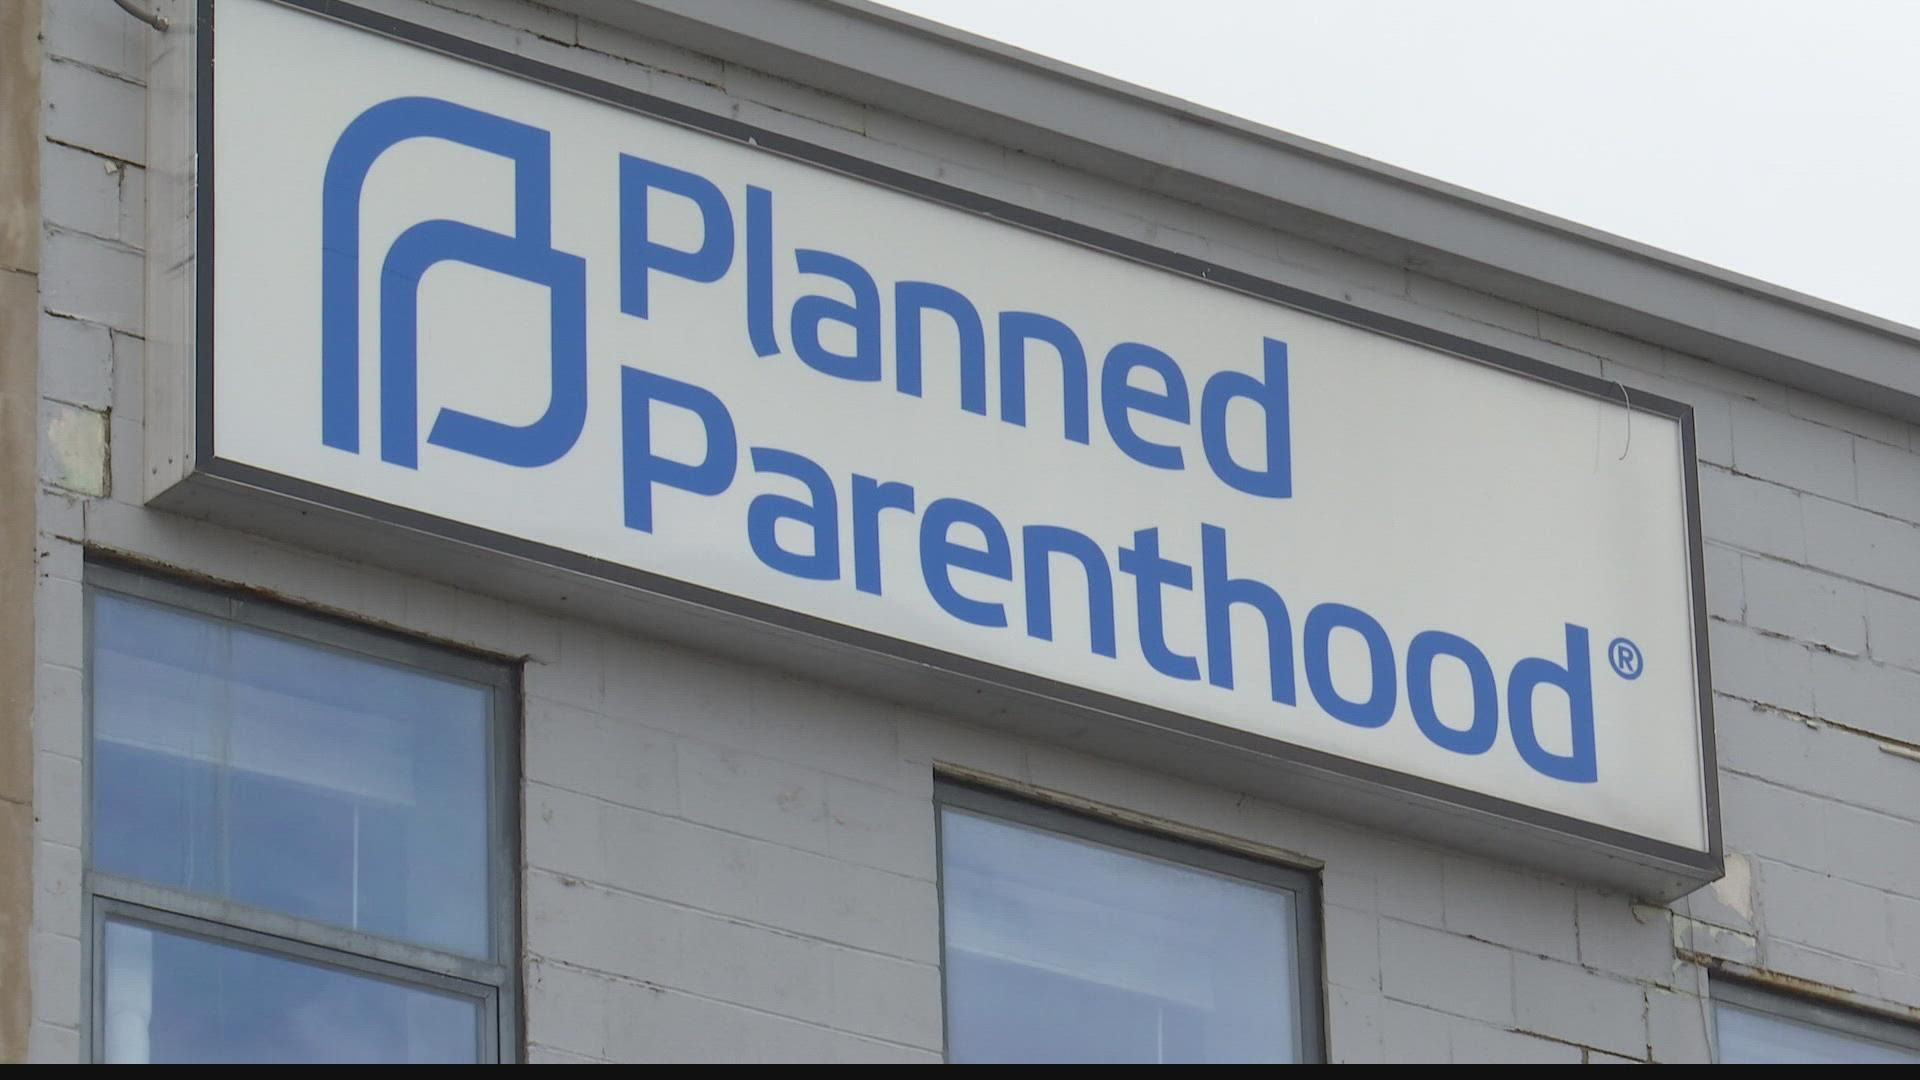 In just the last 3 hours, Planned Parenthood and some other groups announced they filed a lawsuit to stop Indiana's abortion ban from taking effect.